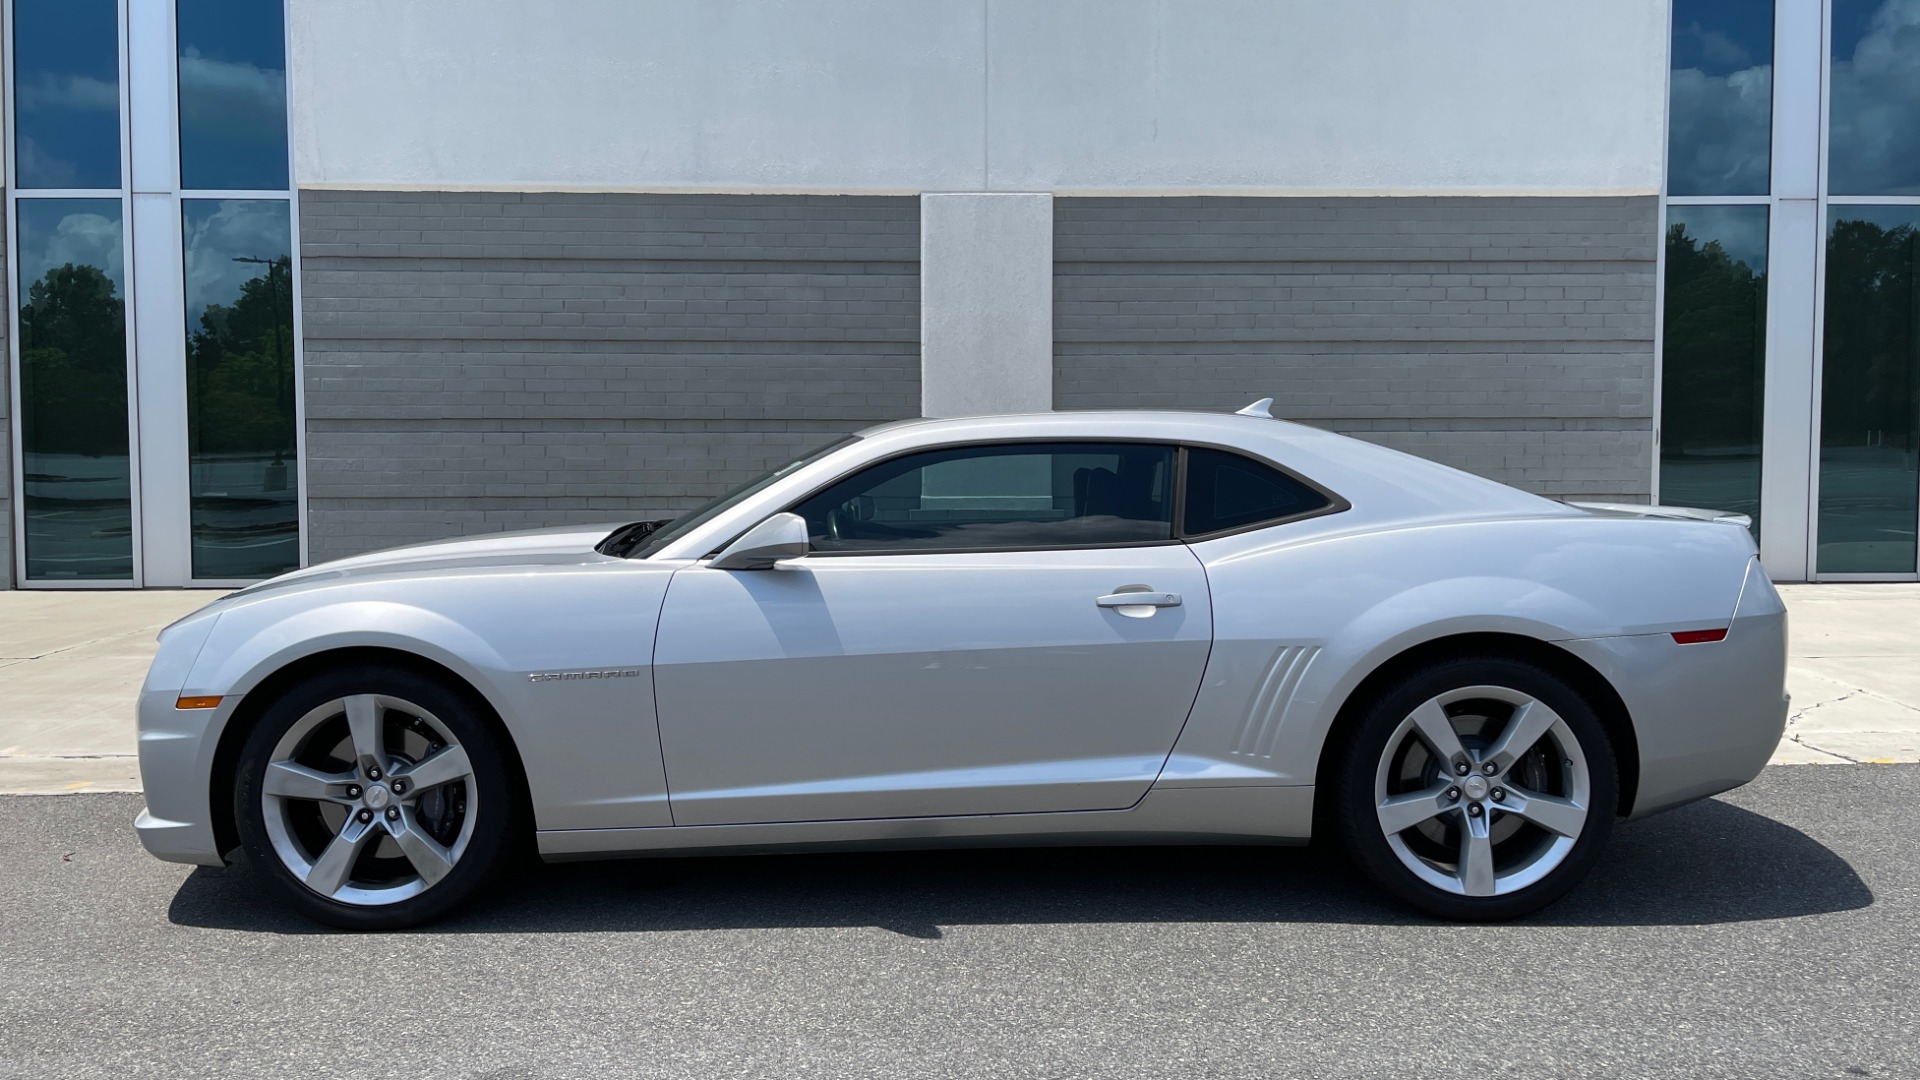 Used 2012 Chevrolet CAMARO SS COUPE / 6.2L V8 / 2SS / RS PKG / 6-SPD AUTO / SUNROOF / REMOTE START for sale Sold at Formula Imports in Charlotte NC 28227 4